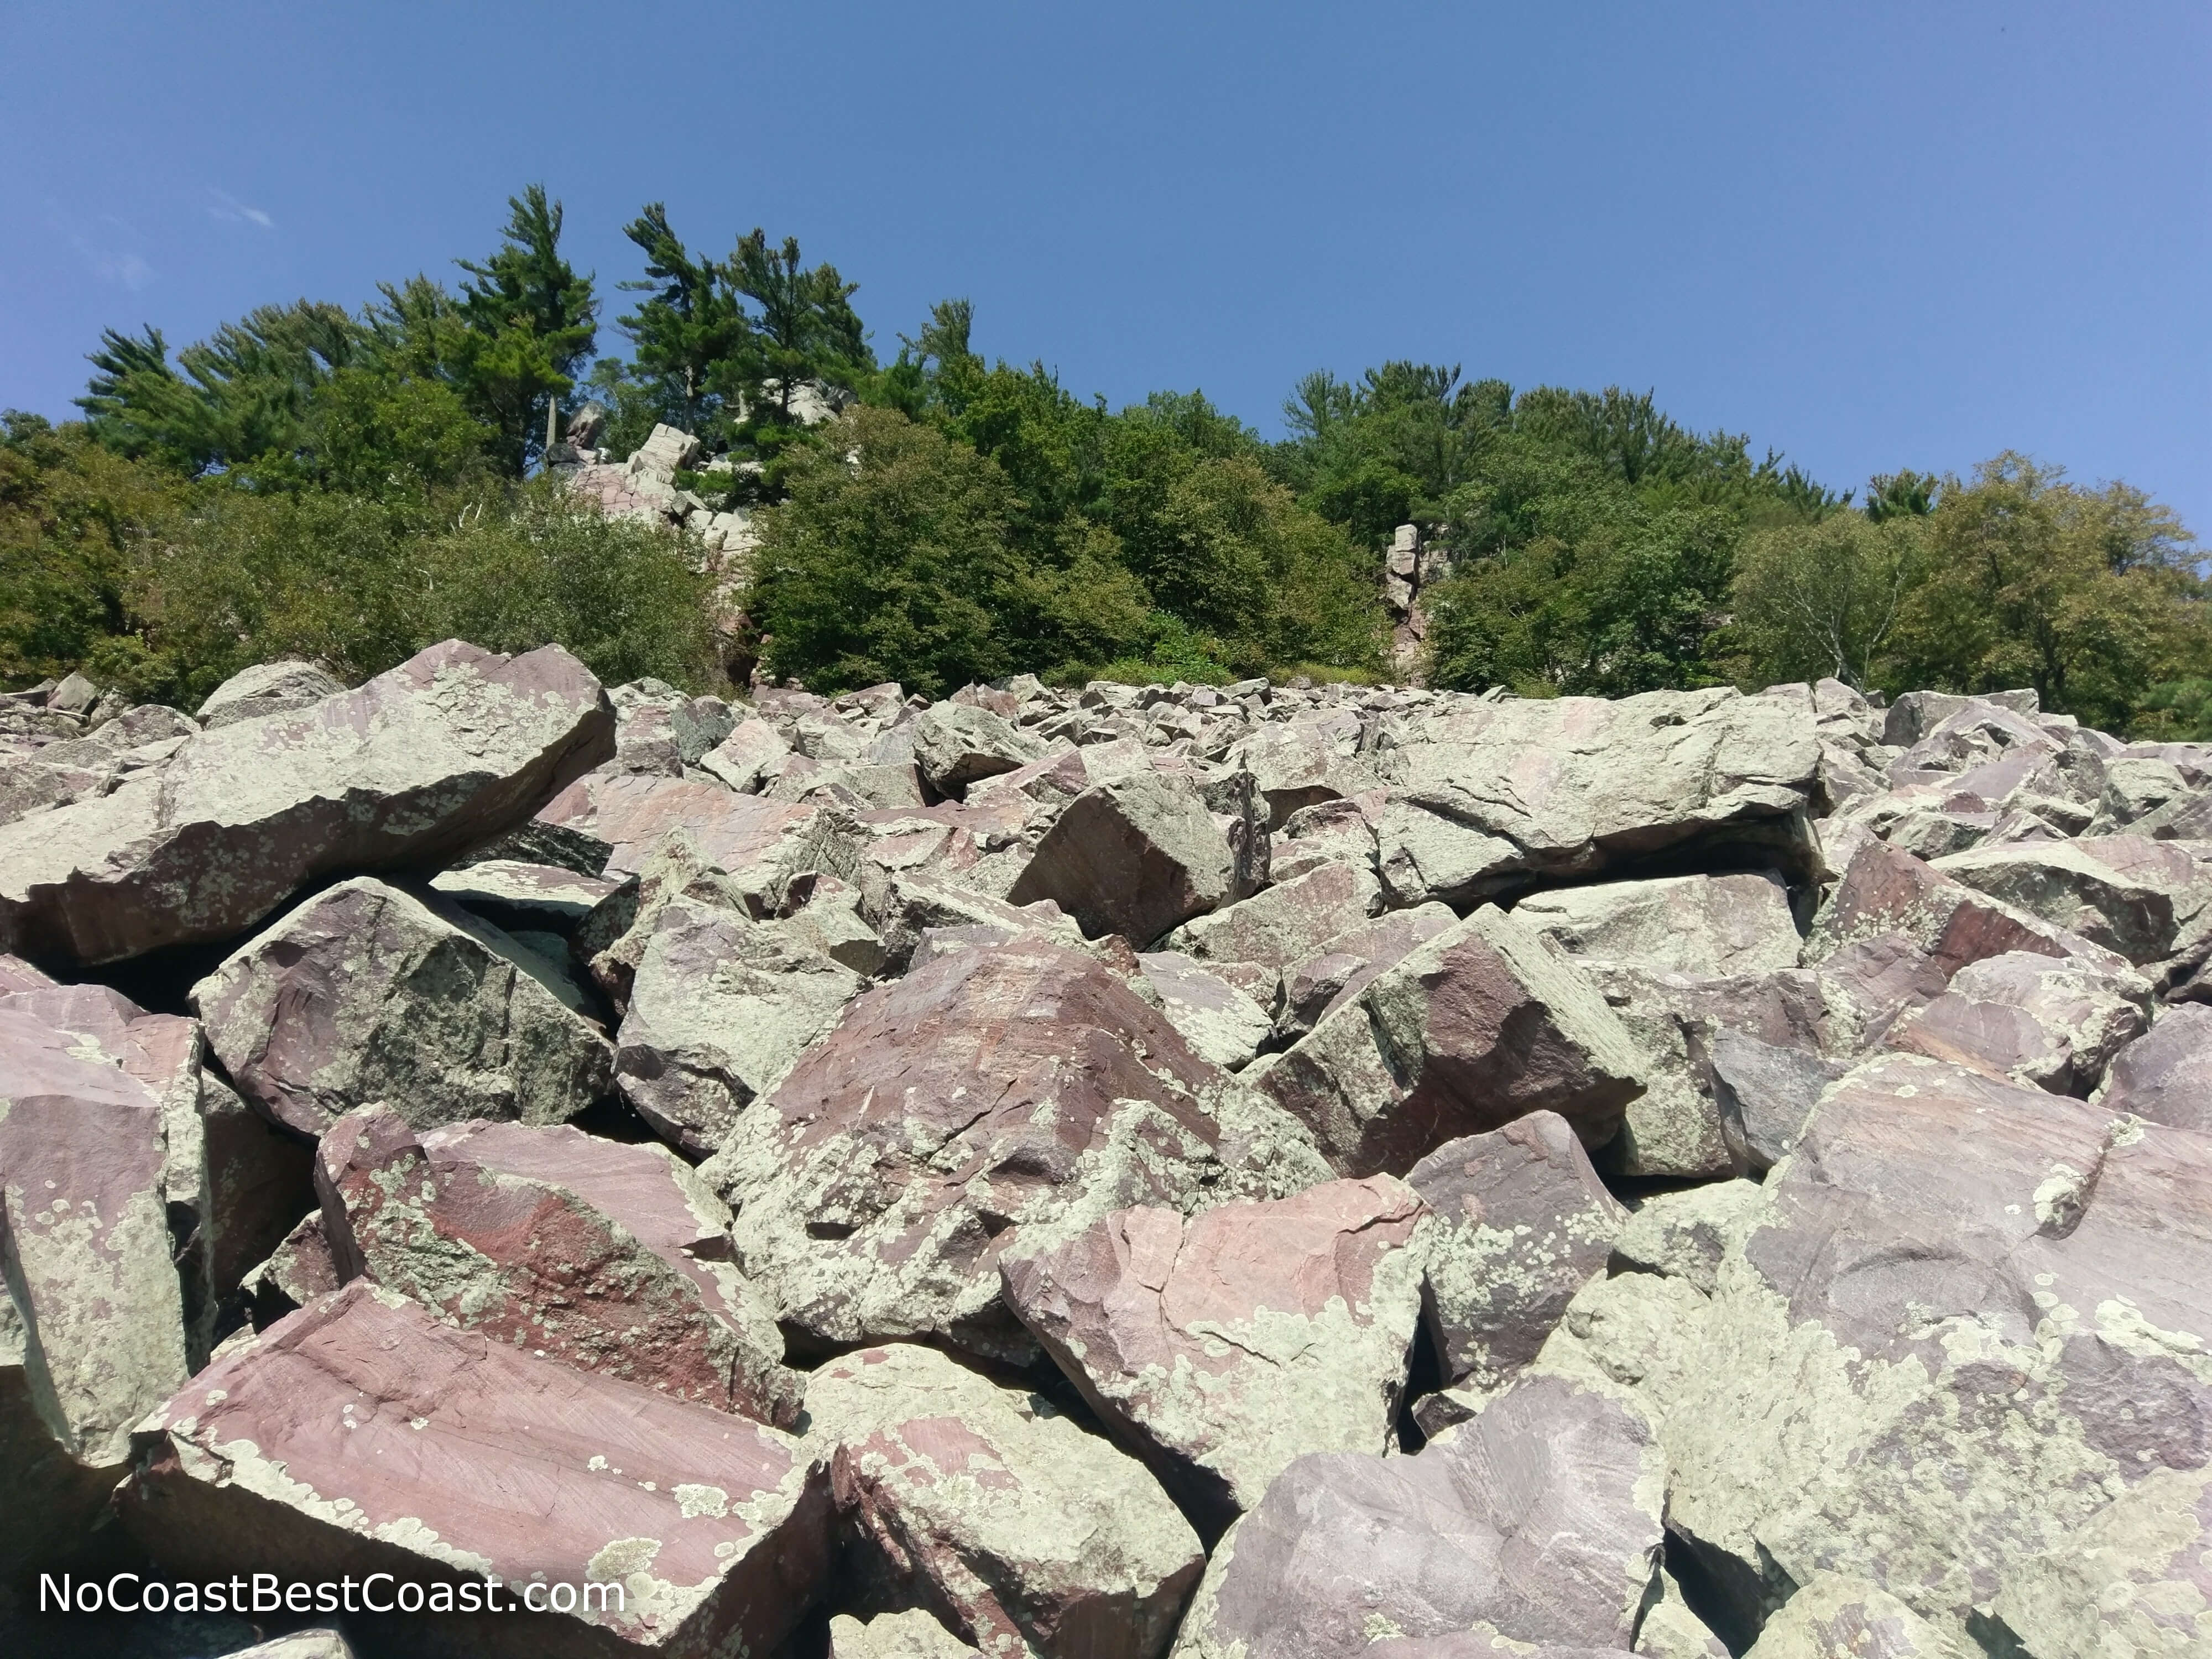 Looking up at the boulders on the southern slope of the East Bluff